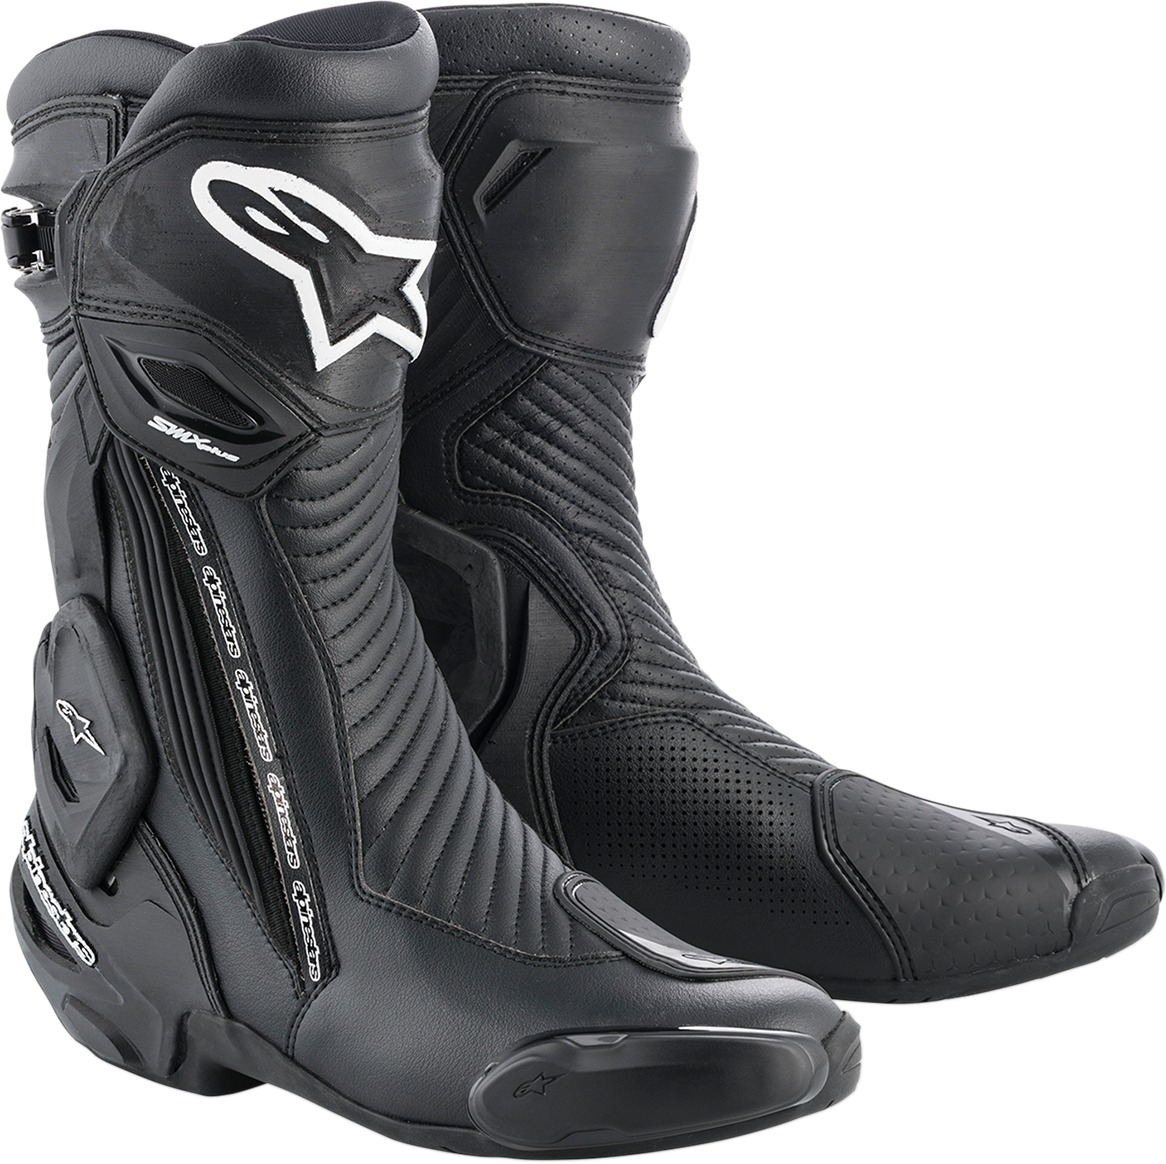 SMX Plus Street Riding Boots Black US 11.5 - Click Image to Close